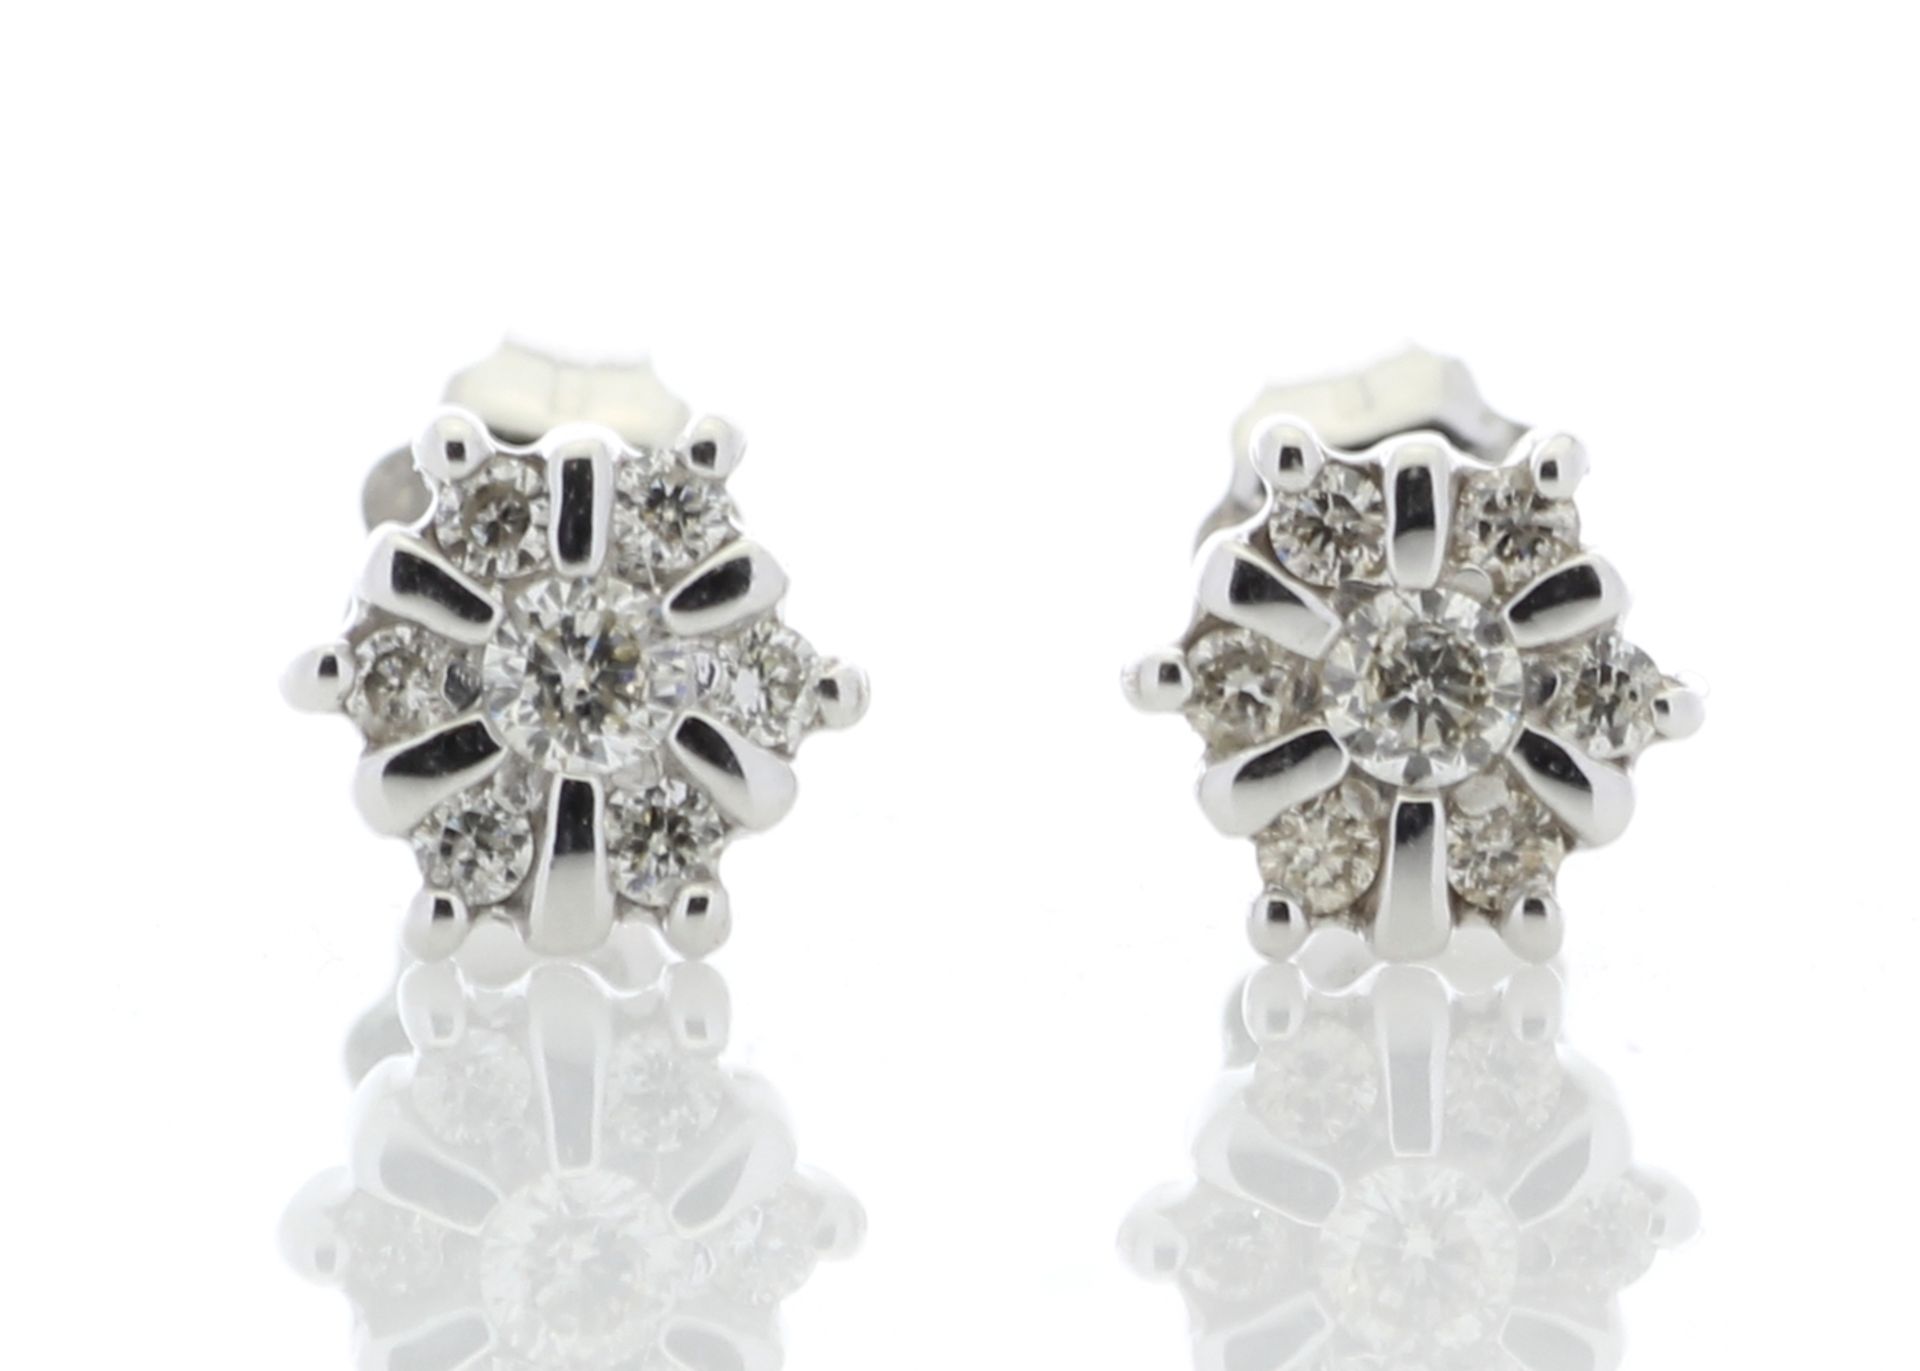 9ct White Gold Fancy Diamond Flower Earring 0.20 Carats - Valued by GIE £2,595.00 - 9ct White Gold